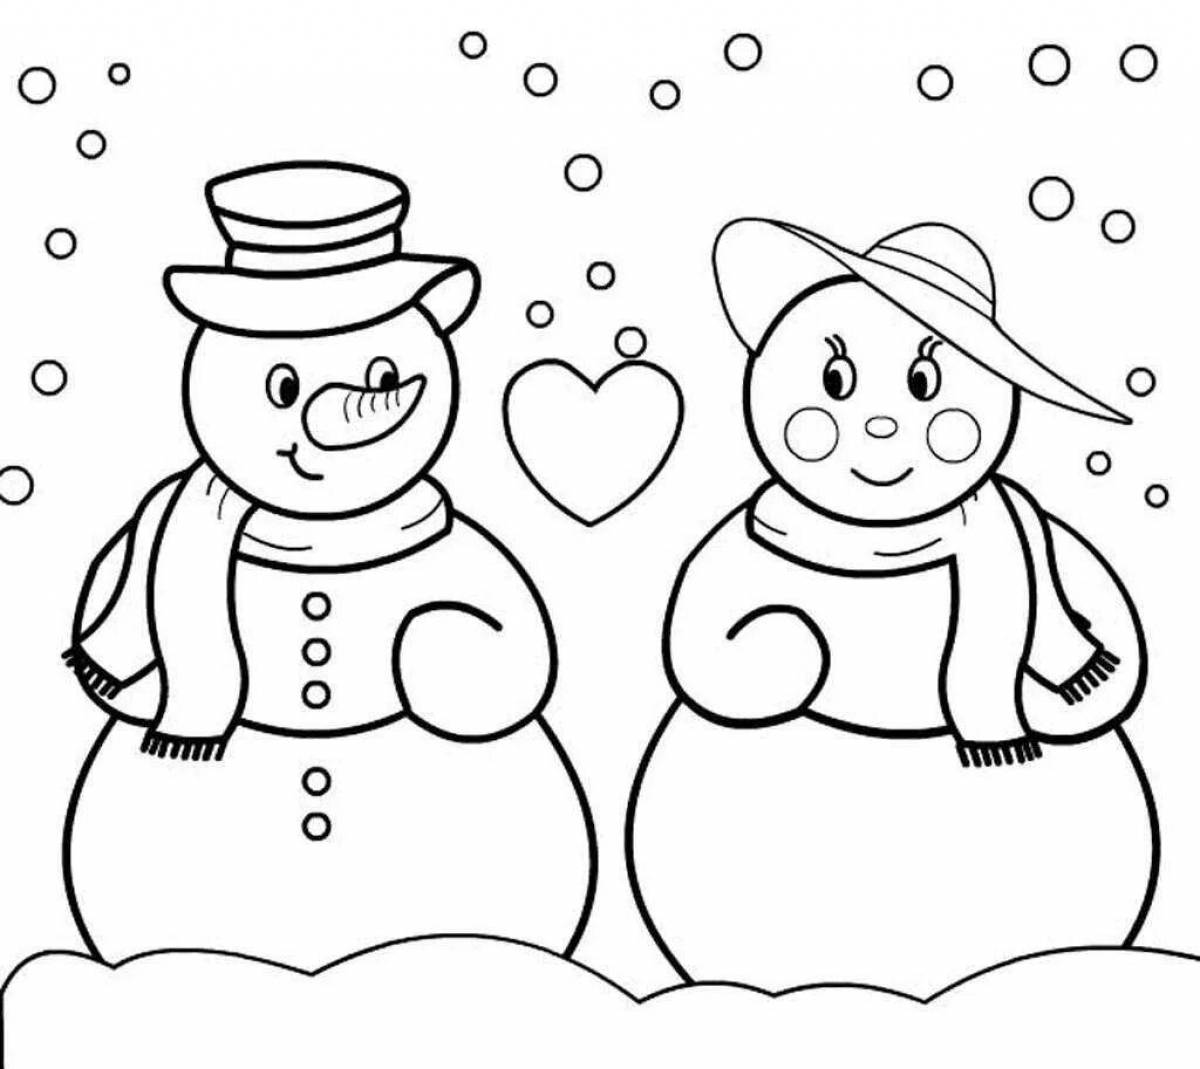 Snowman family coloring book